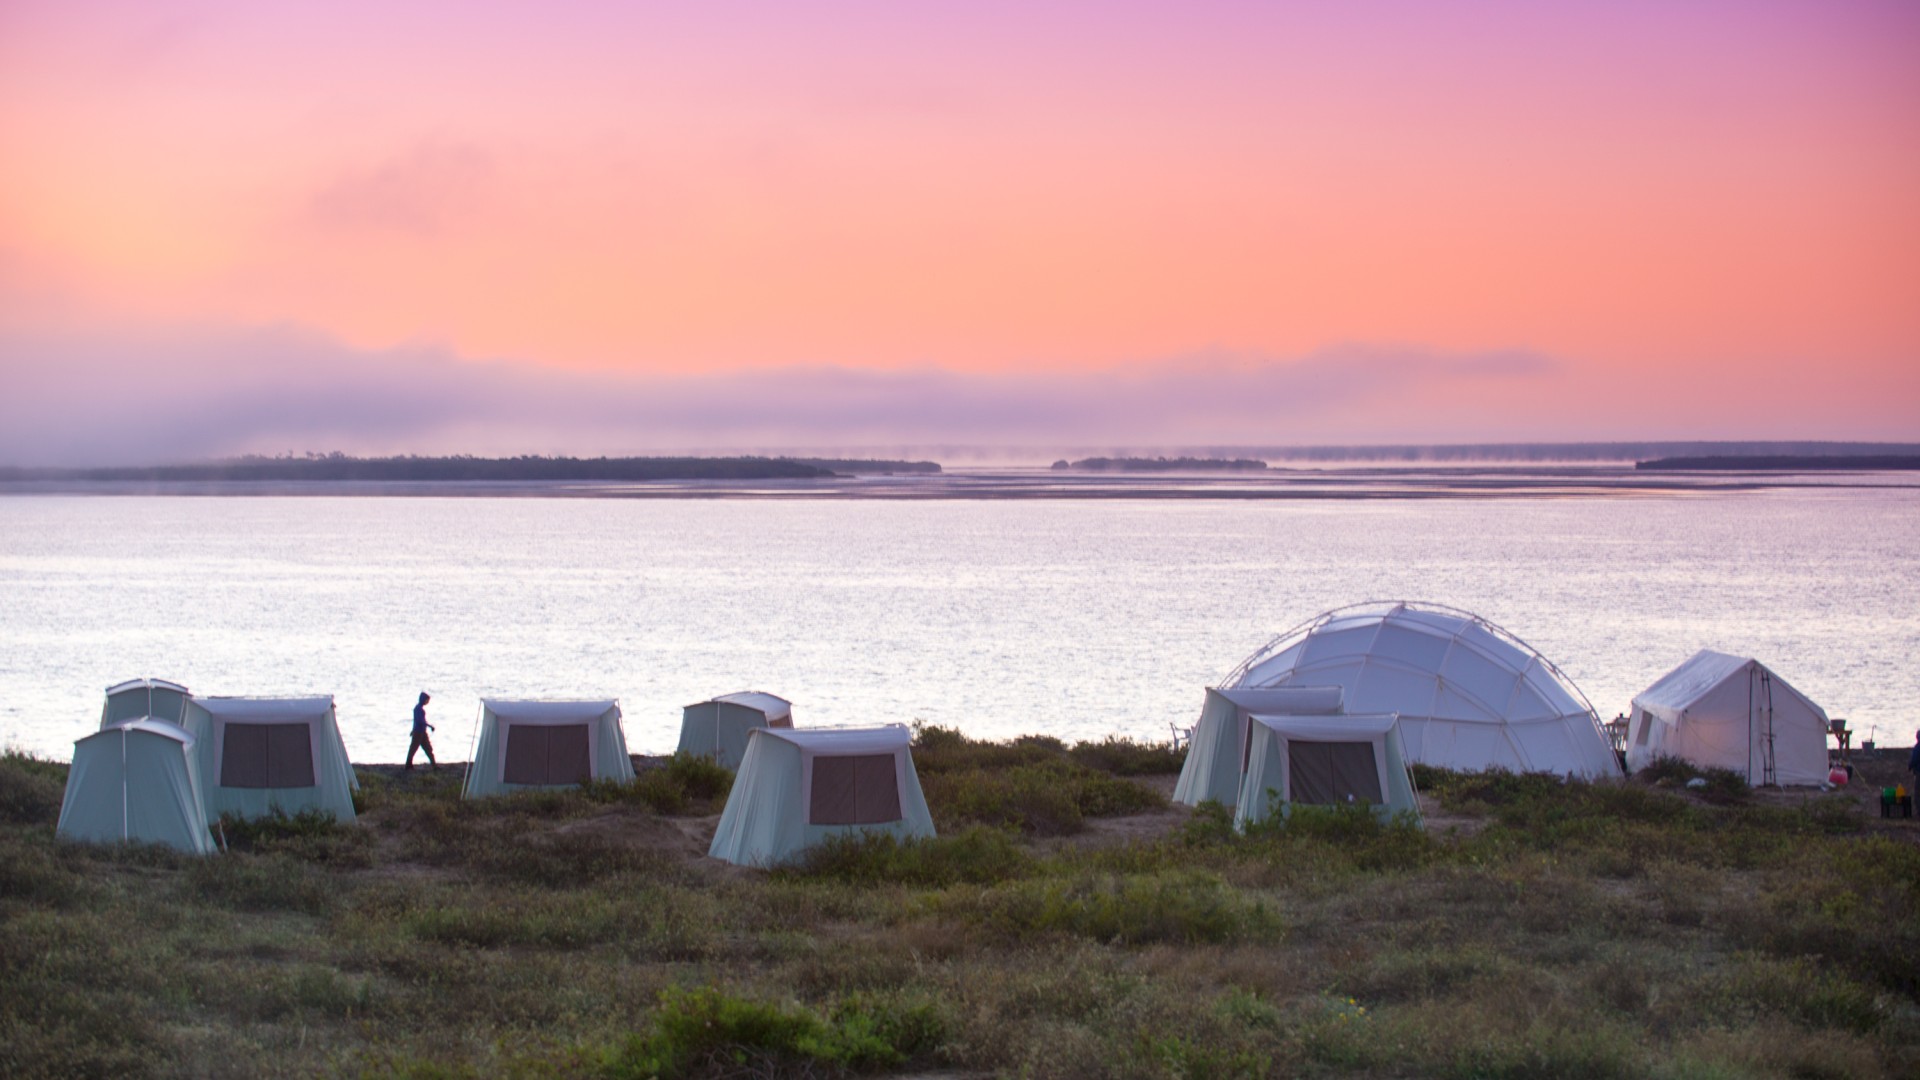 Sunset over canvas tents set up on a beach